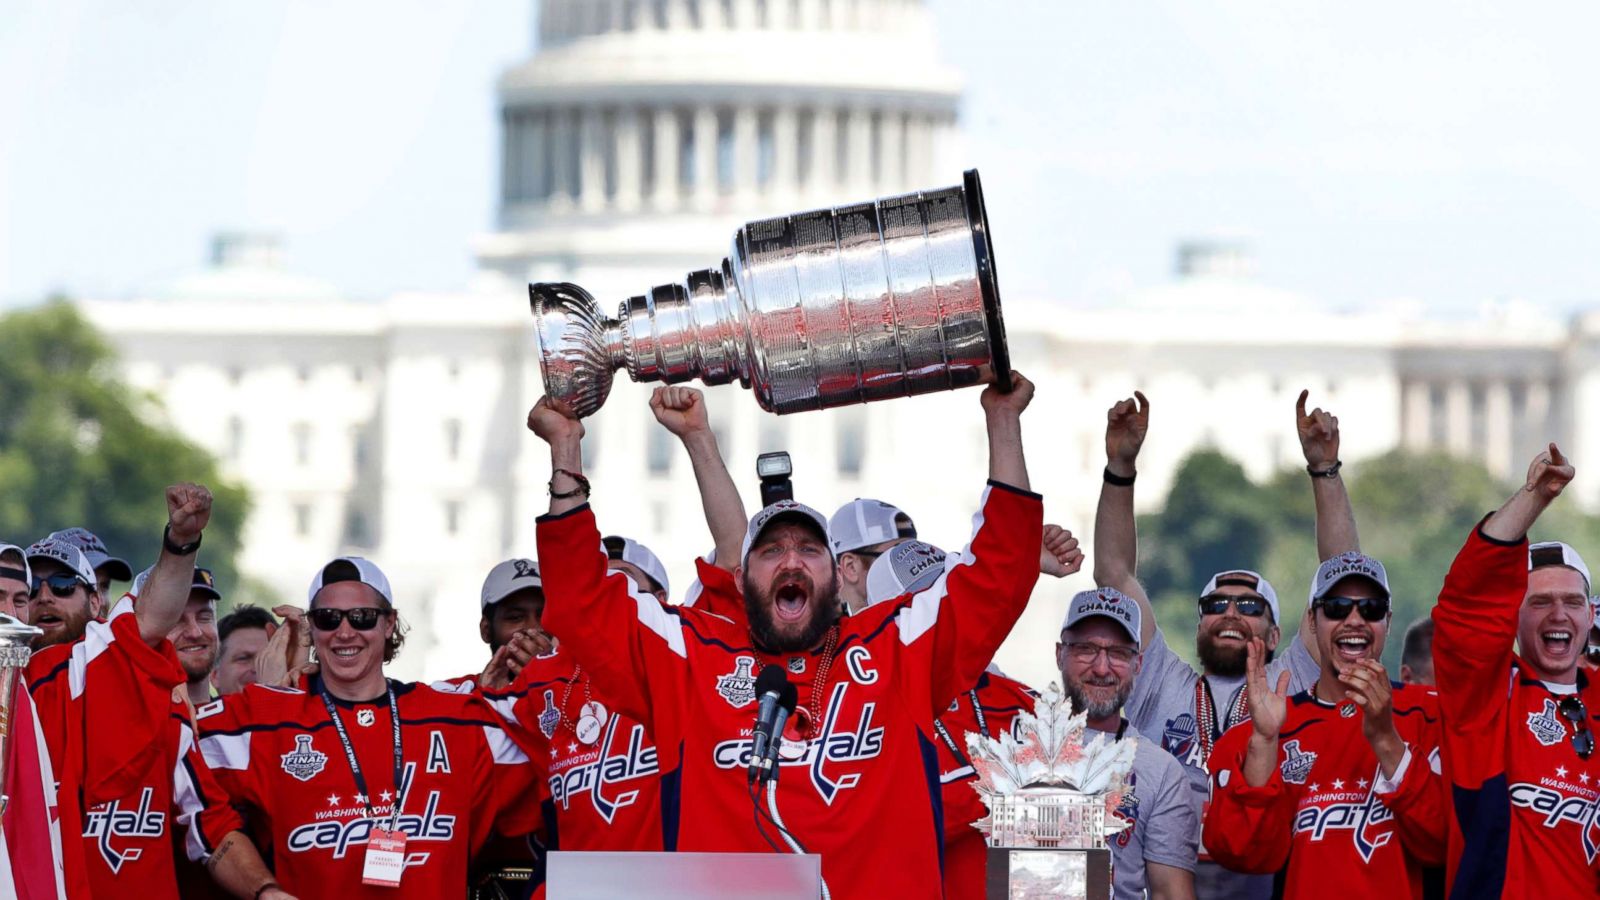 PPT - Washington Capitals Stanley Cup parade PowerPoint